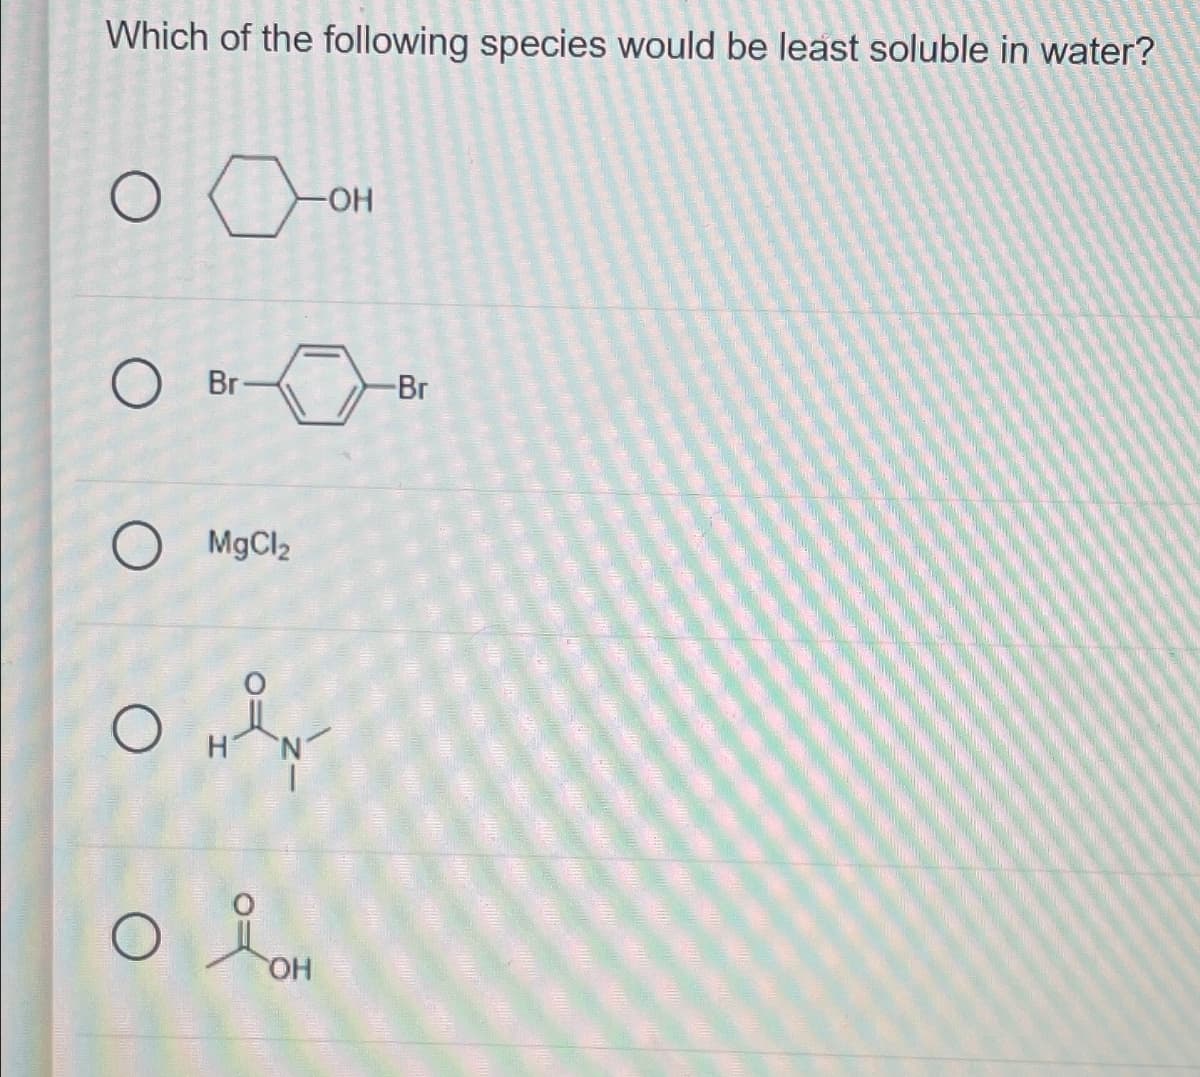 Which of the following species would be least soluble in water?
-OH
○ Br
-Br
MgCl2
O w
JOH